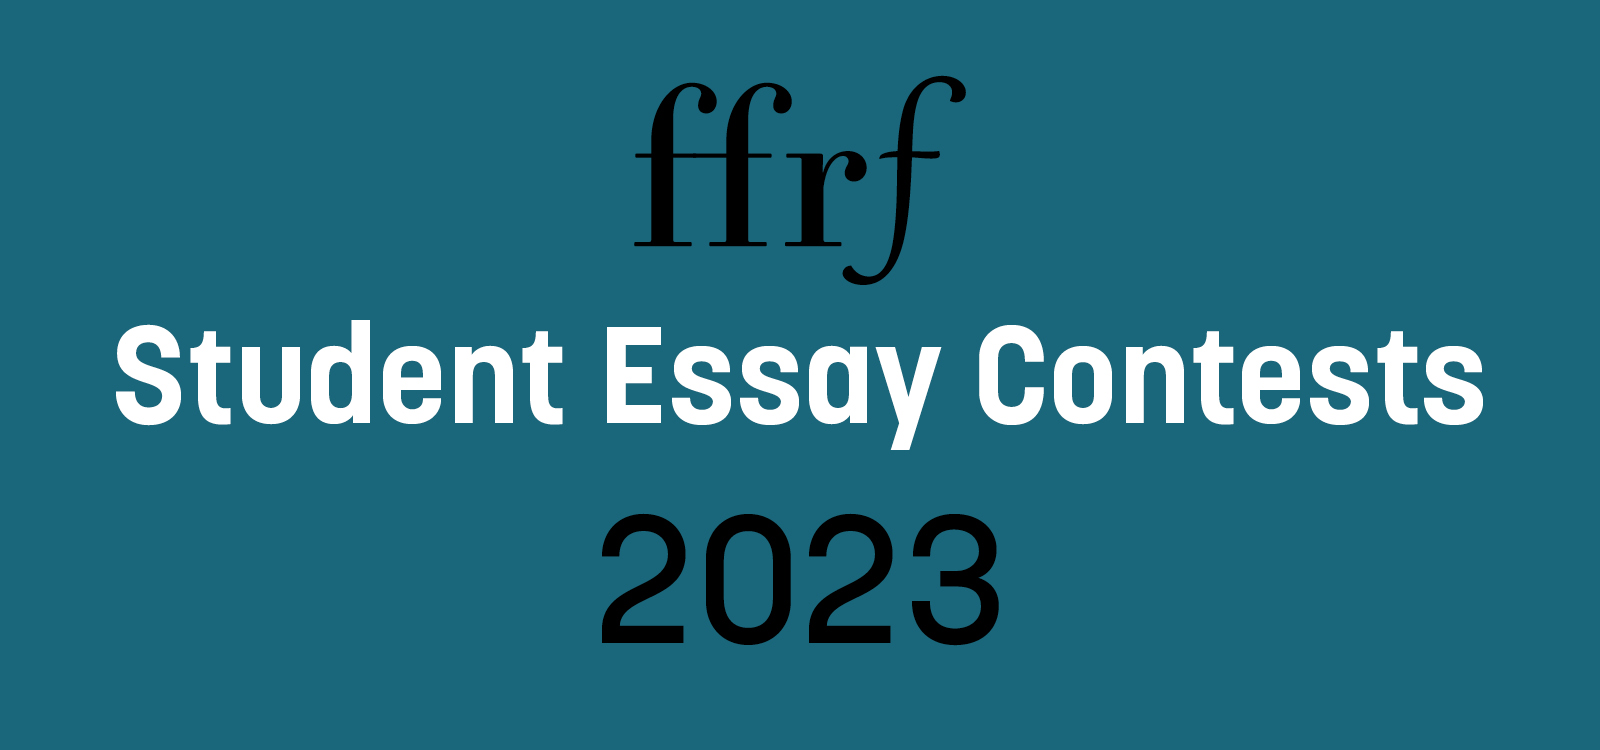 FFRF Student Essay Contests 2023